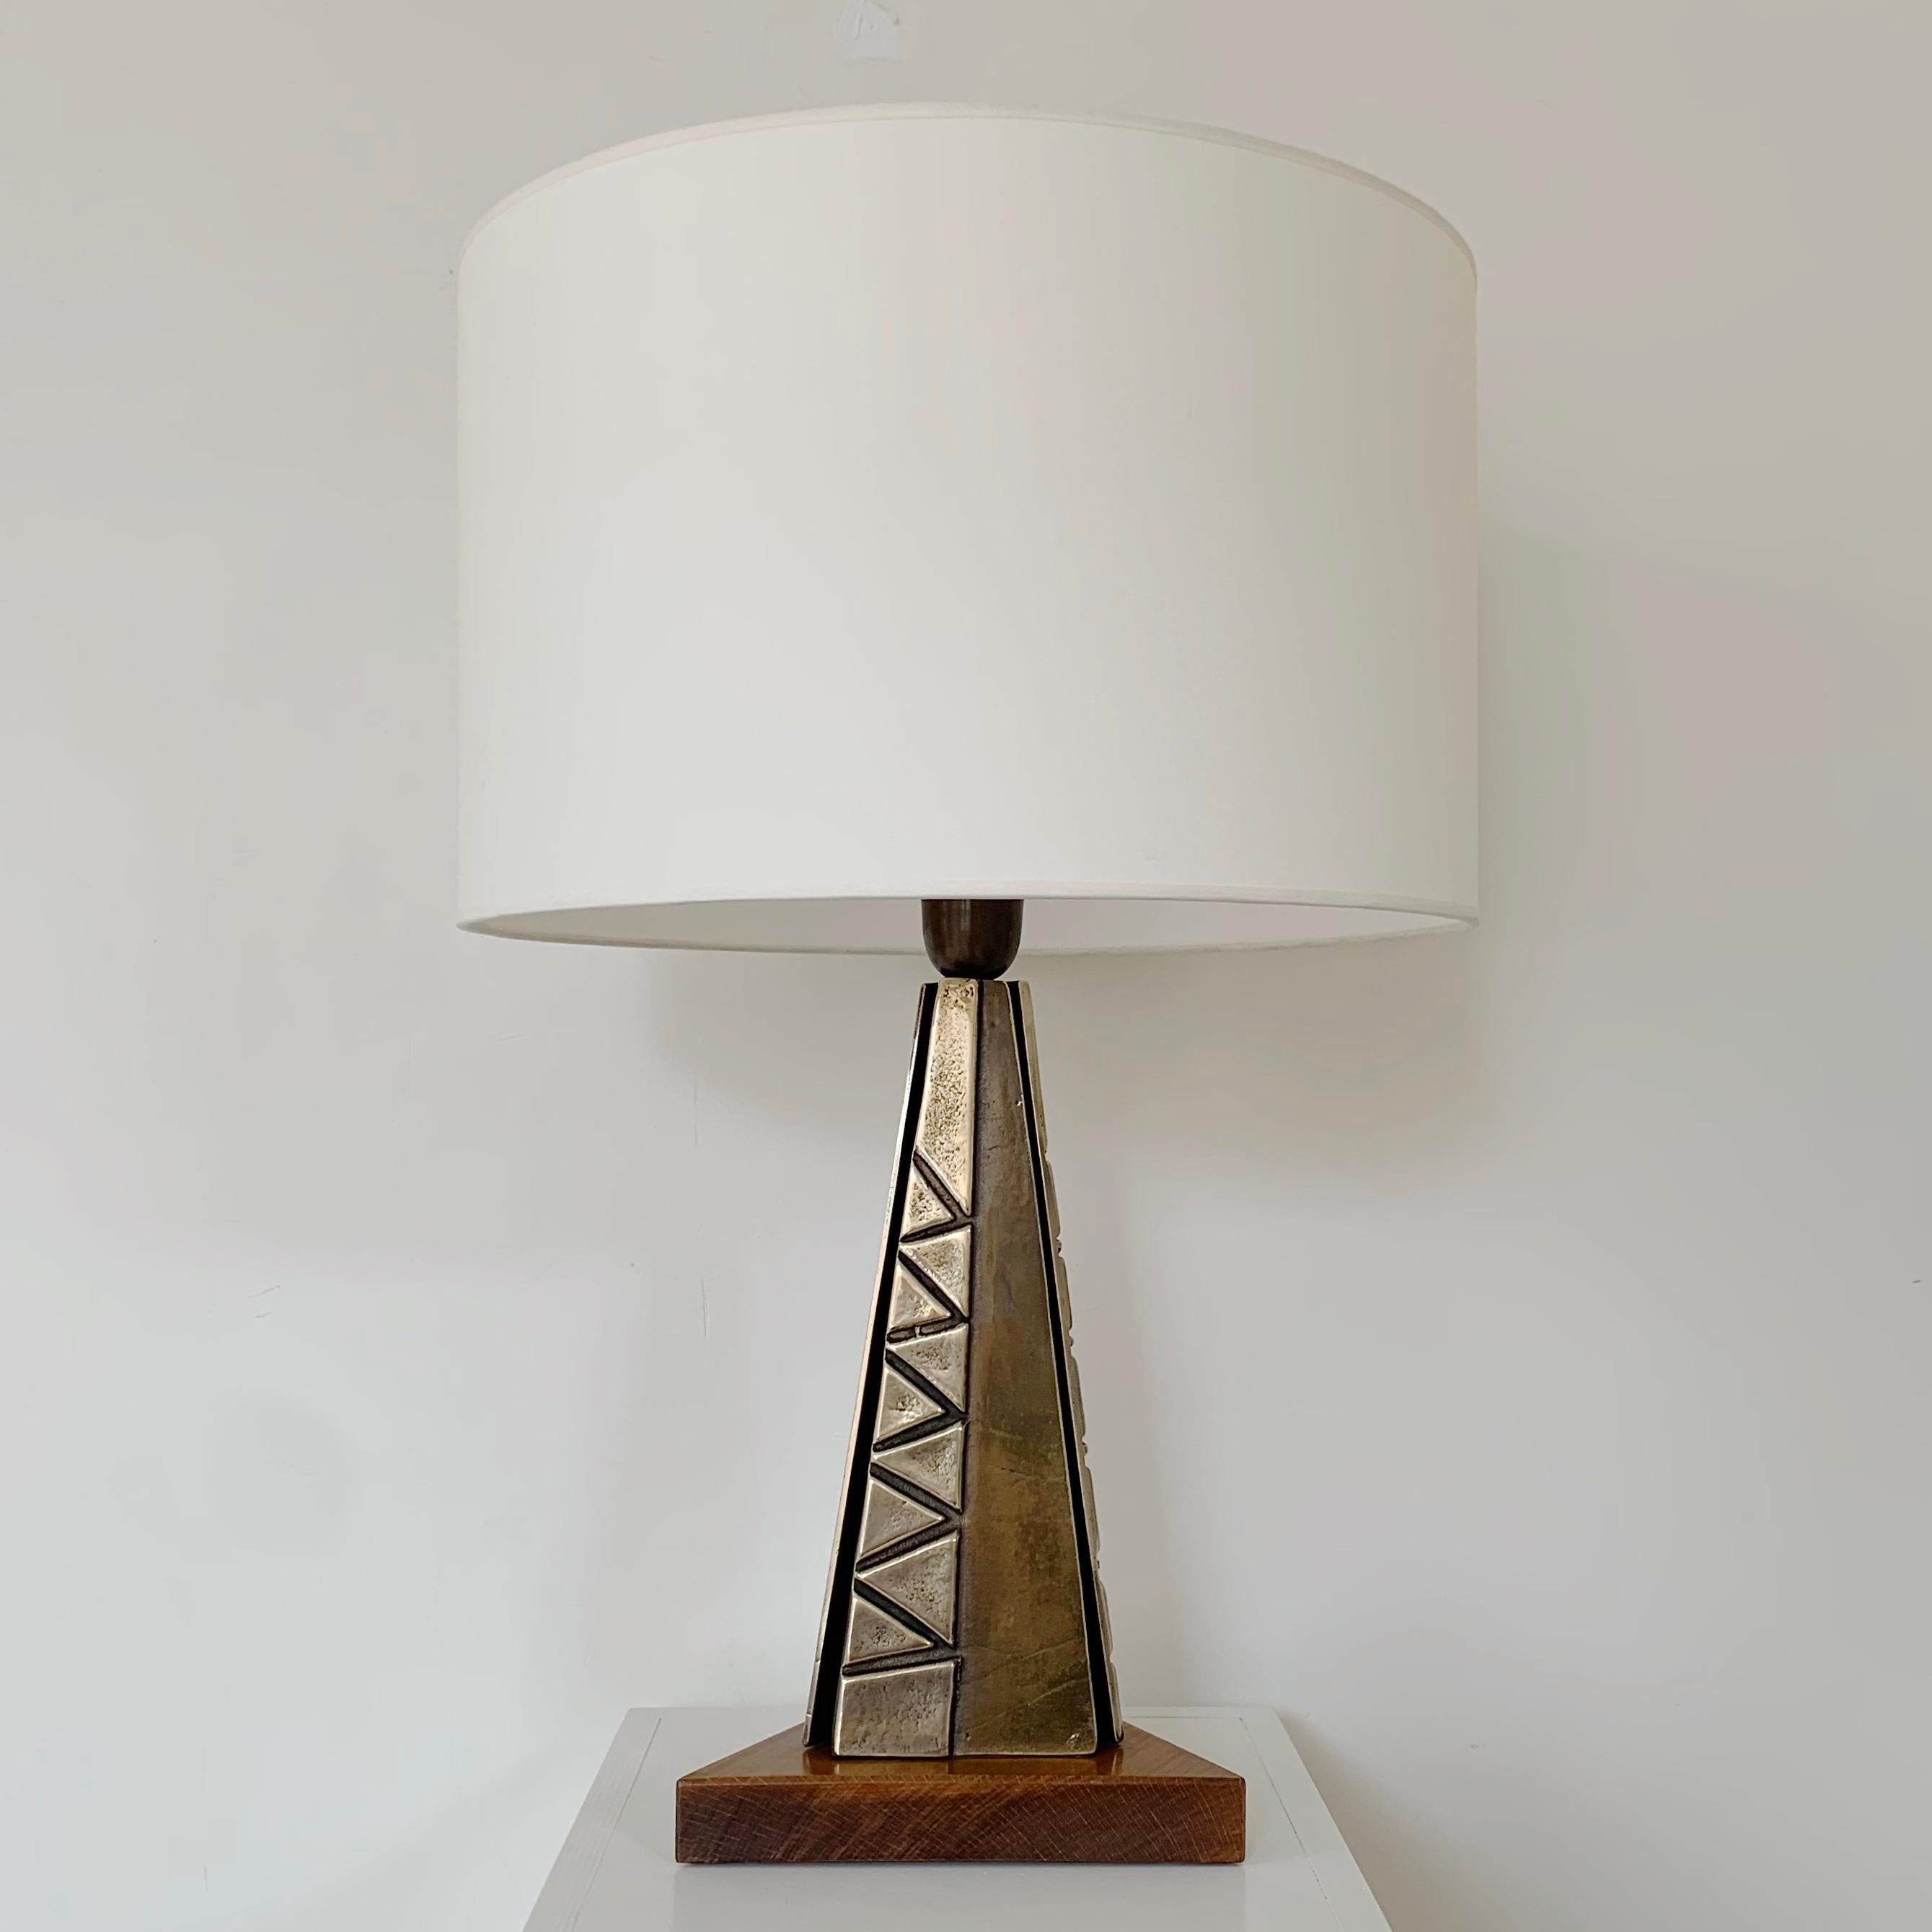 Decorative mid-century table lamp, circa 1960, Italy.
Polished and patinated bronze, triangles decor , triangular oak base, new white fabric shade.
Rewired, ready for US and Europe use.
Dimensions: 61 cm: total height, 40 cm: diameter of the